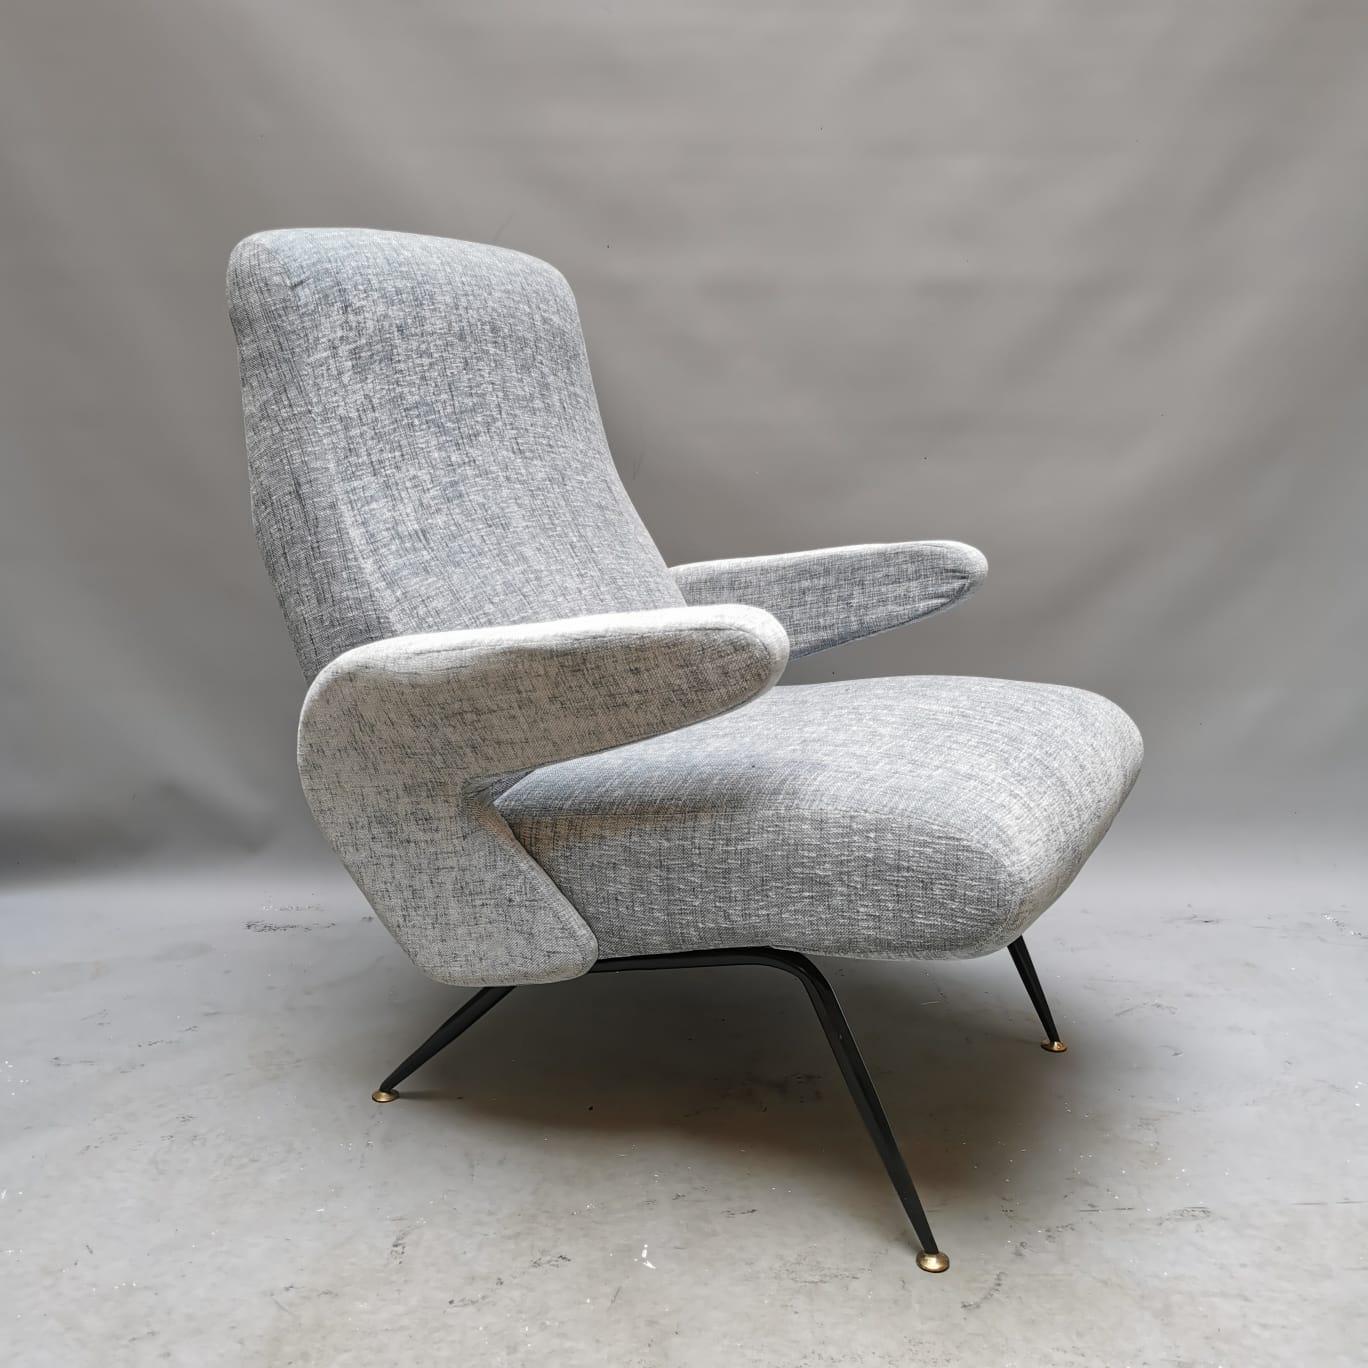 Armchair in Style of Delfino by Nino Zoncada In Good Condition For Sale In Milano, Lombardia